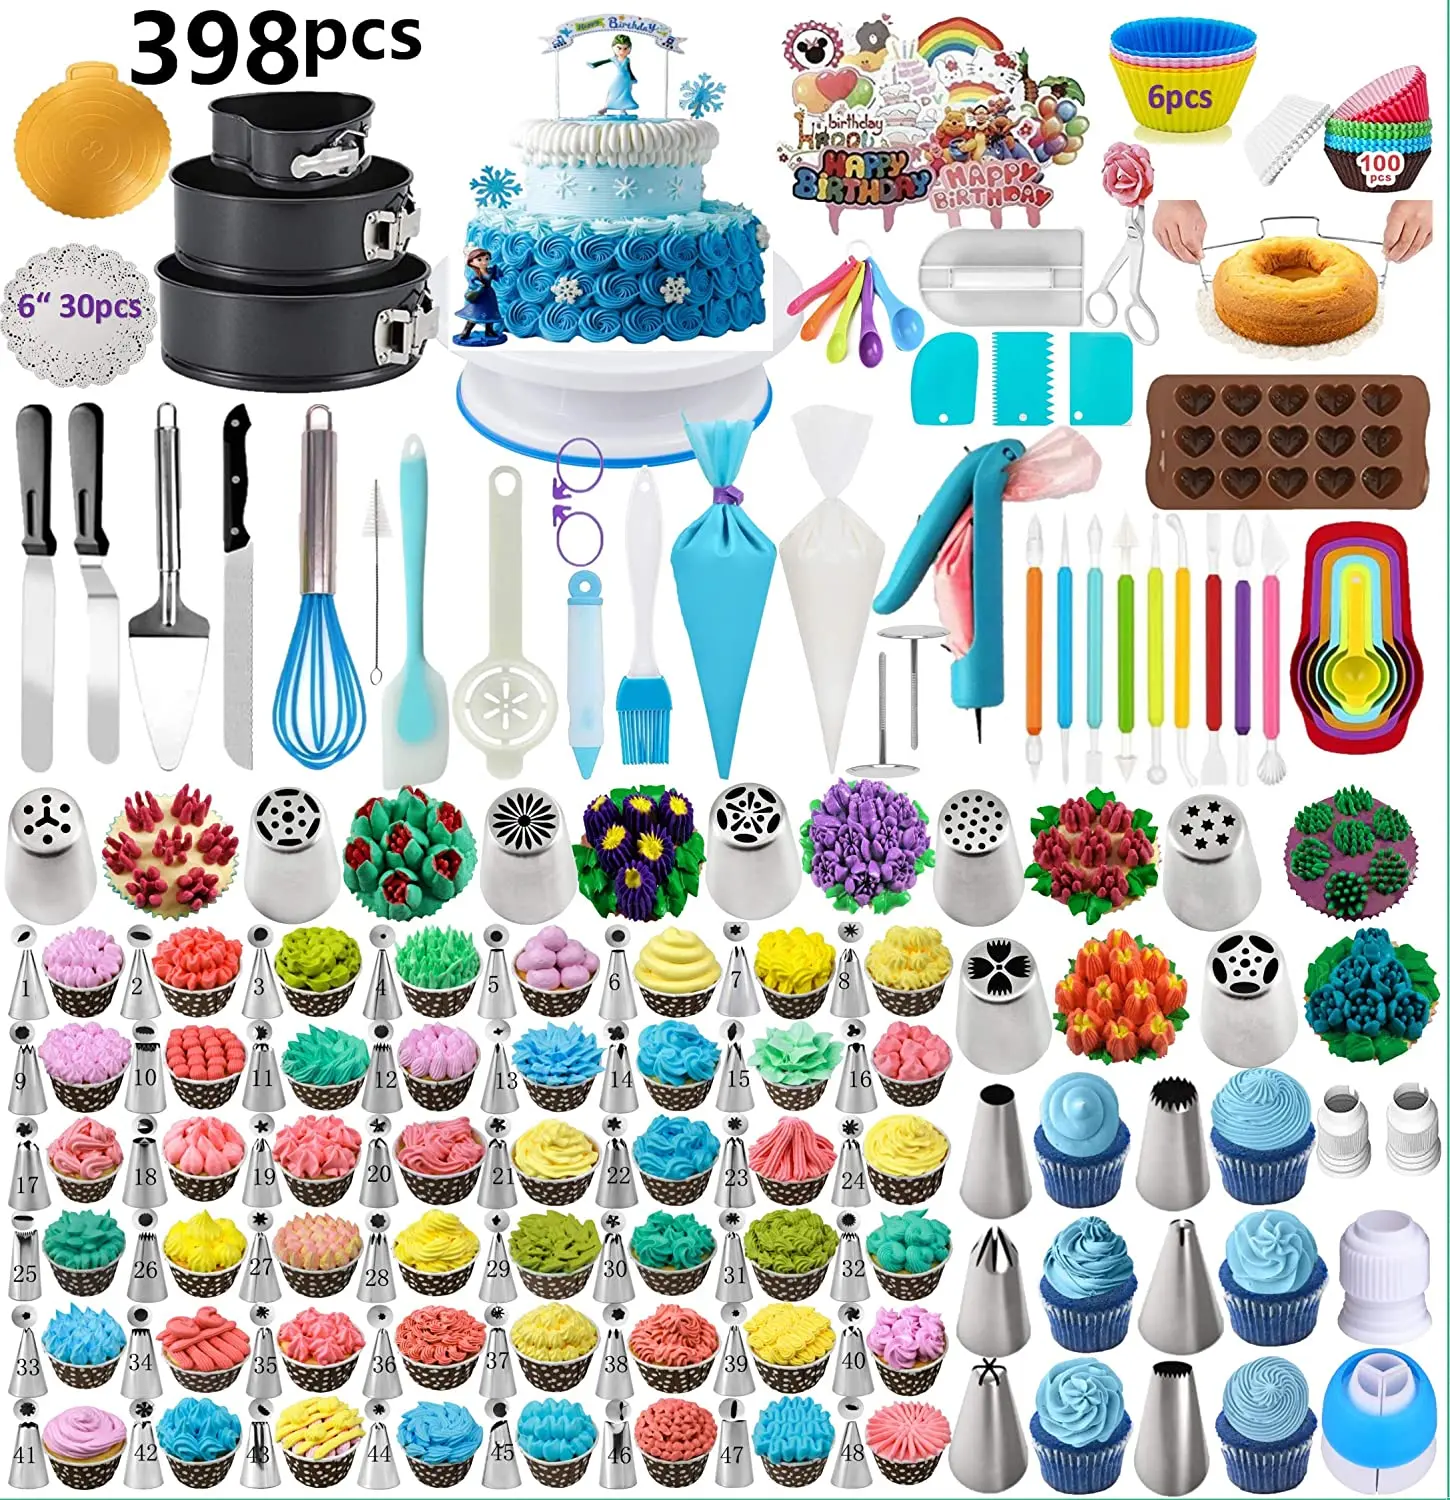 Uarter 290 Pcs Cake Decorating Kit Cake Decorating Supplies with Piping  Bags and Tips Set Baking Supplies Set for Beginner and Cake-Lover -  Walmart.com